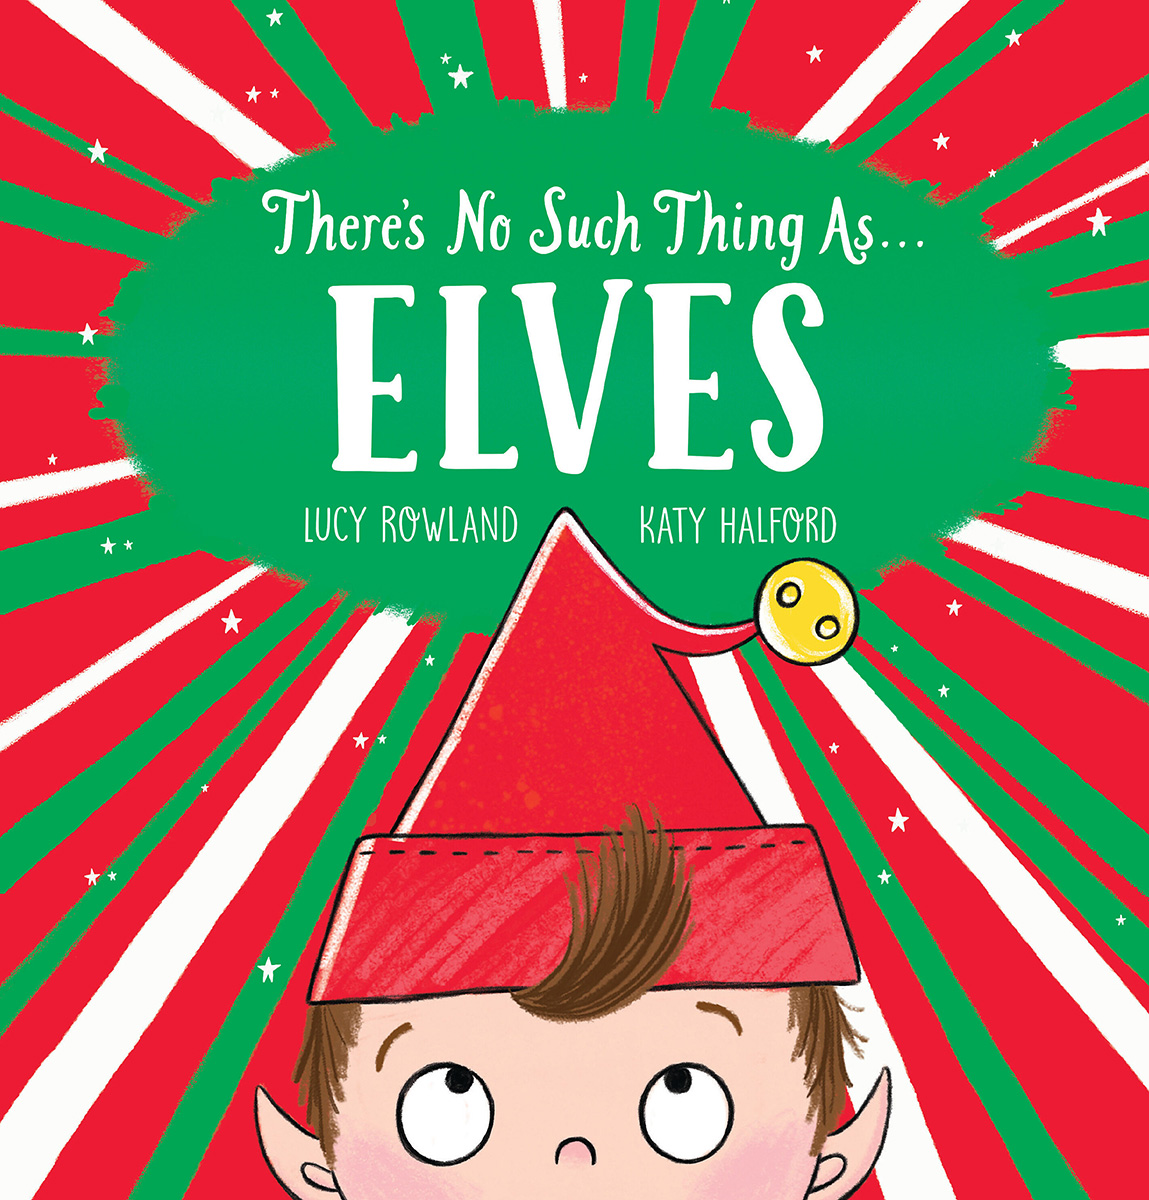 There's No Such Thing as... Elves | Rowland, Lucy (Auteur) | Halford, Katy (Illustrateur)